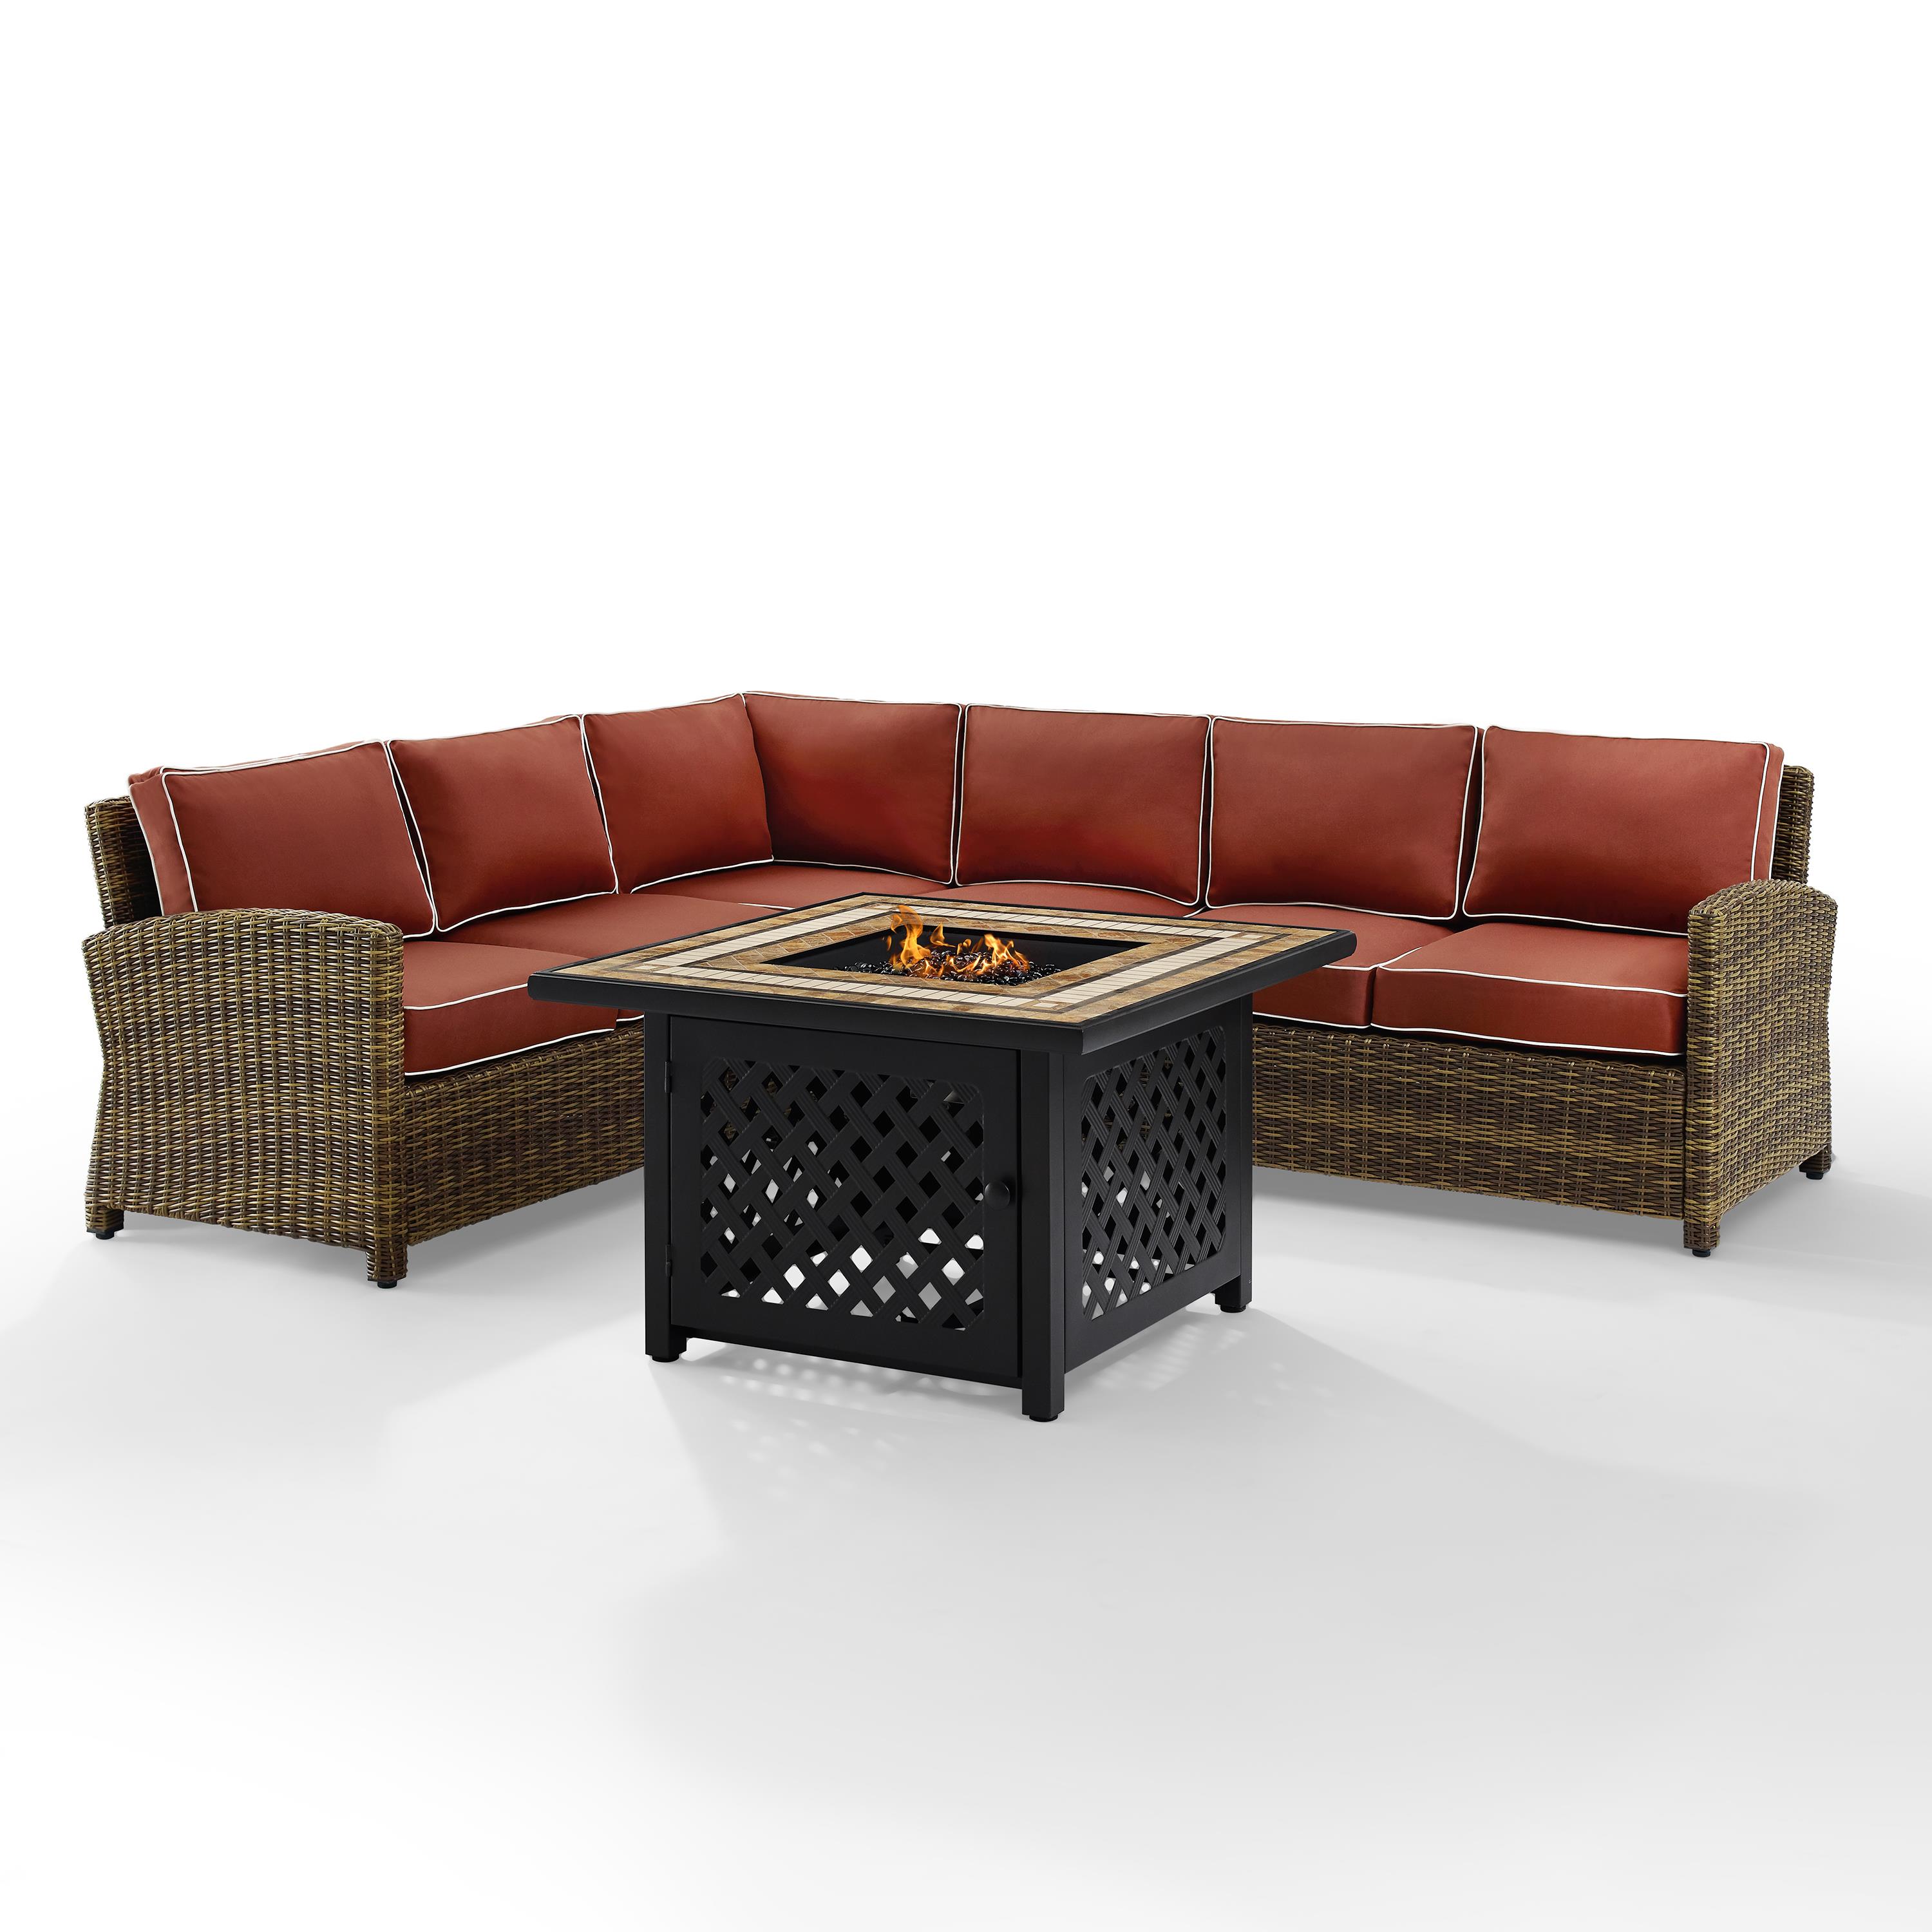 Crosley Furniture Bradenton 5 Piece Fabric Fire Pit Sectional Set in Brown/Red - image 4 of 9